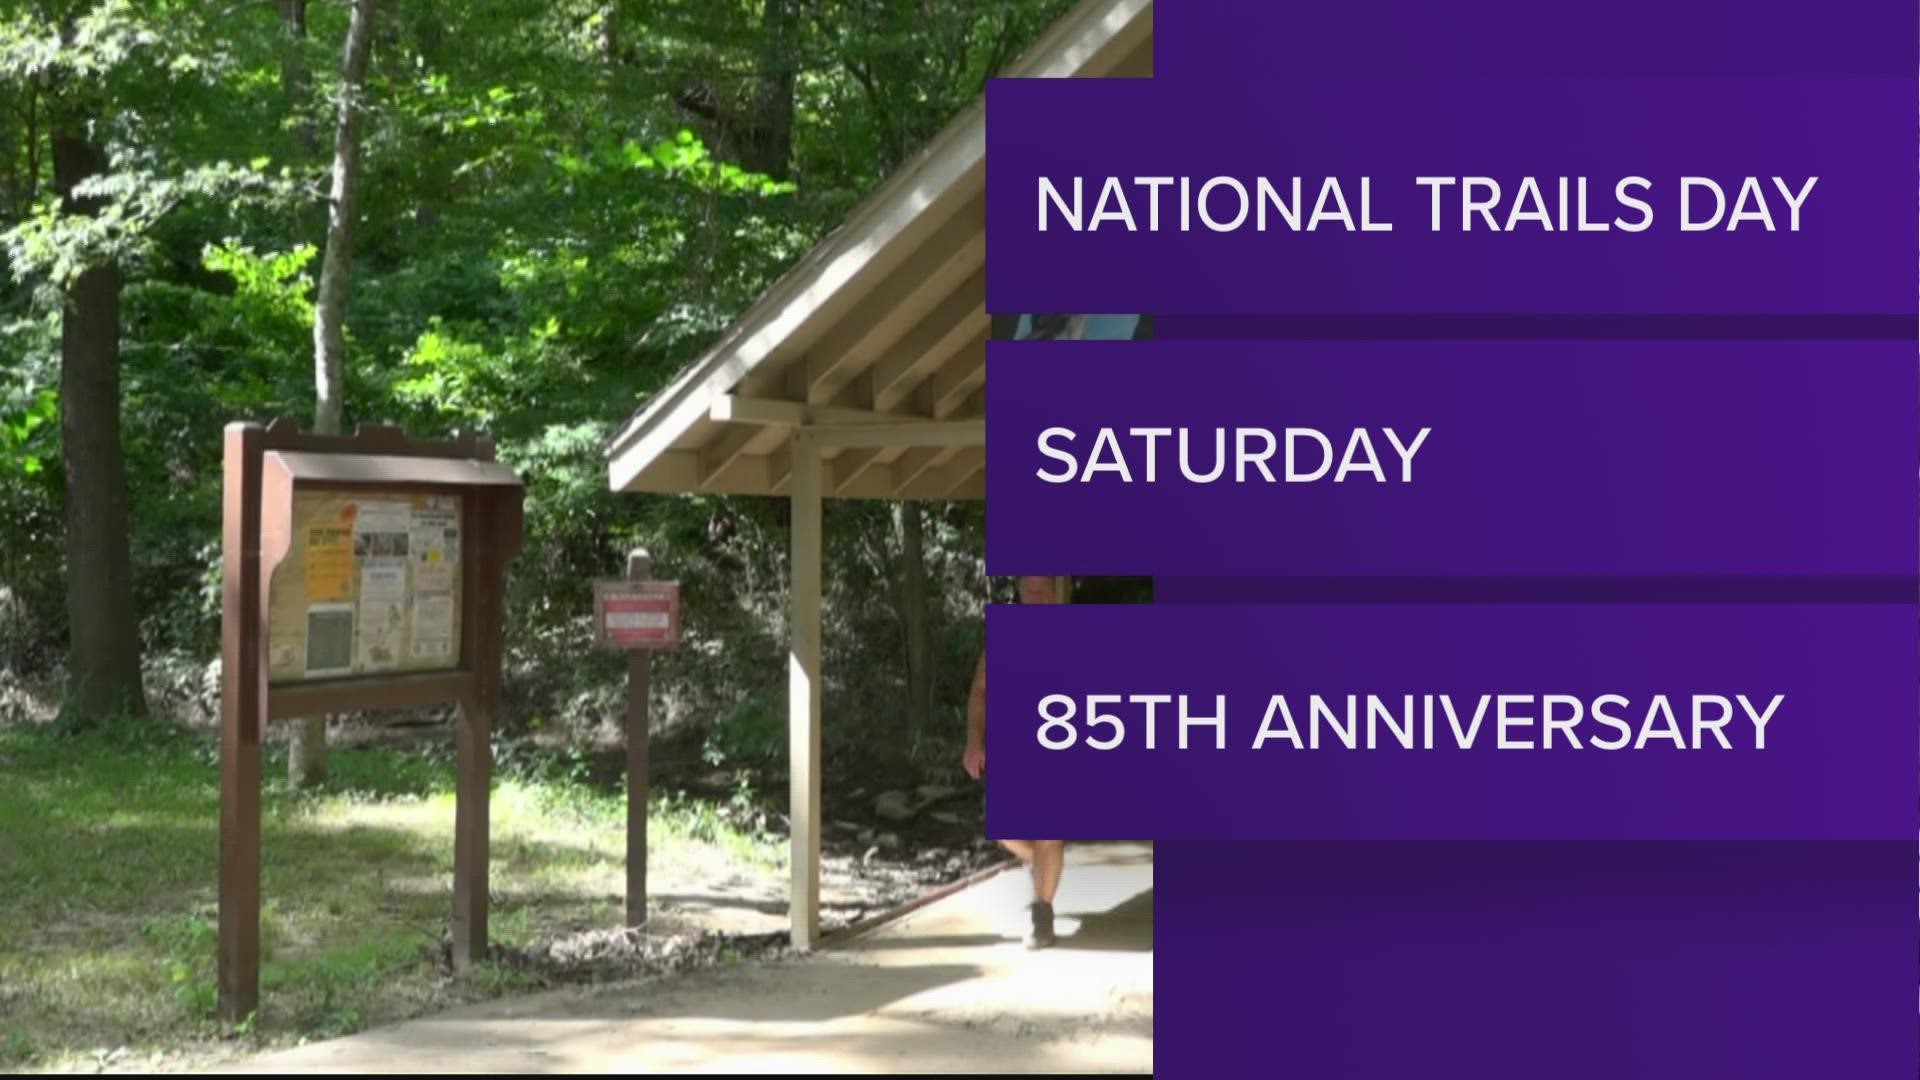 Tennessee State Parks is celebrating National Trails Day on Saturday, June 4, 2022, with free guided hikes.